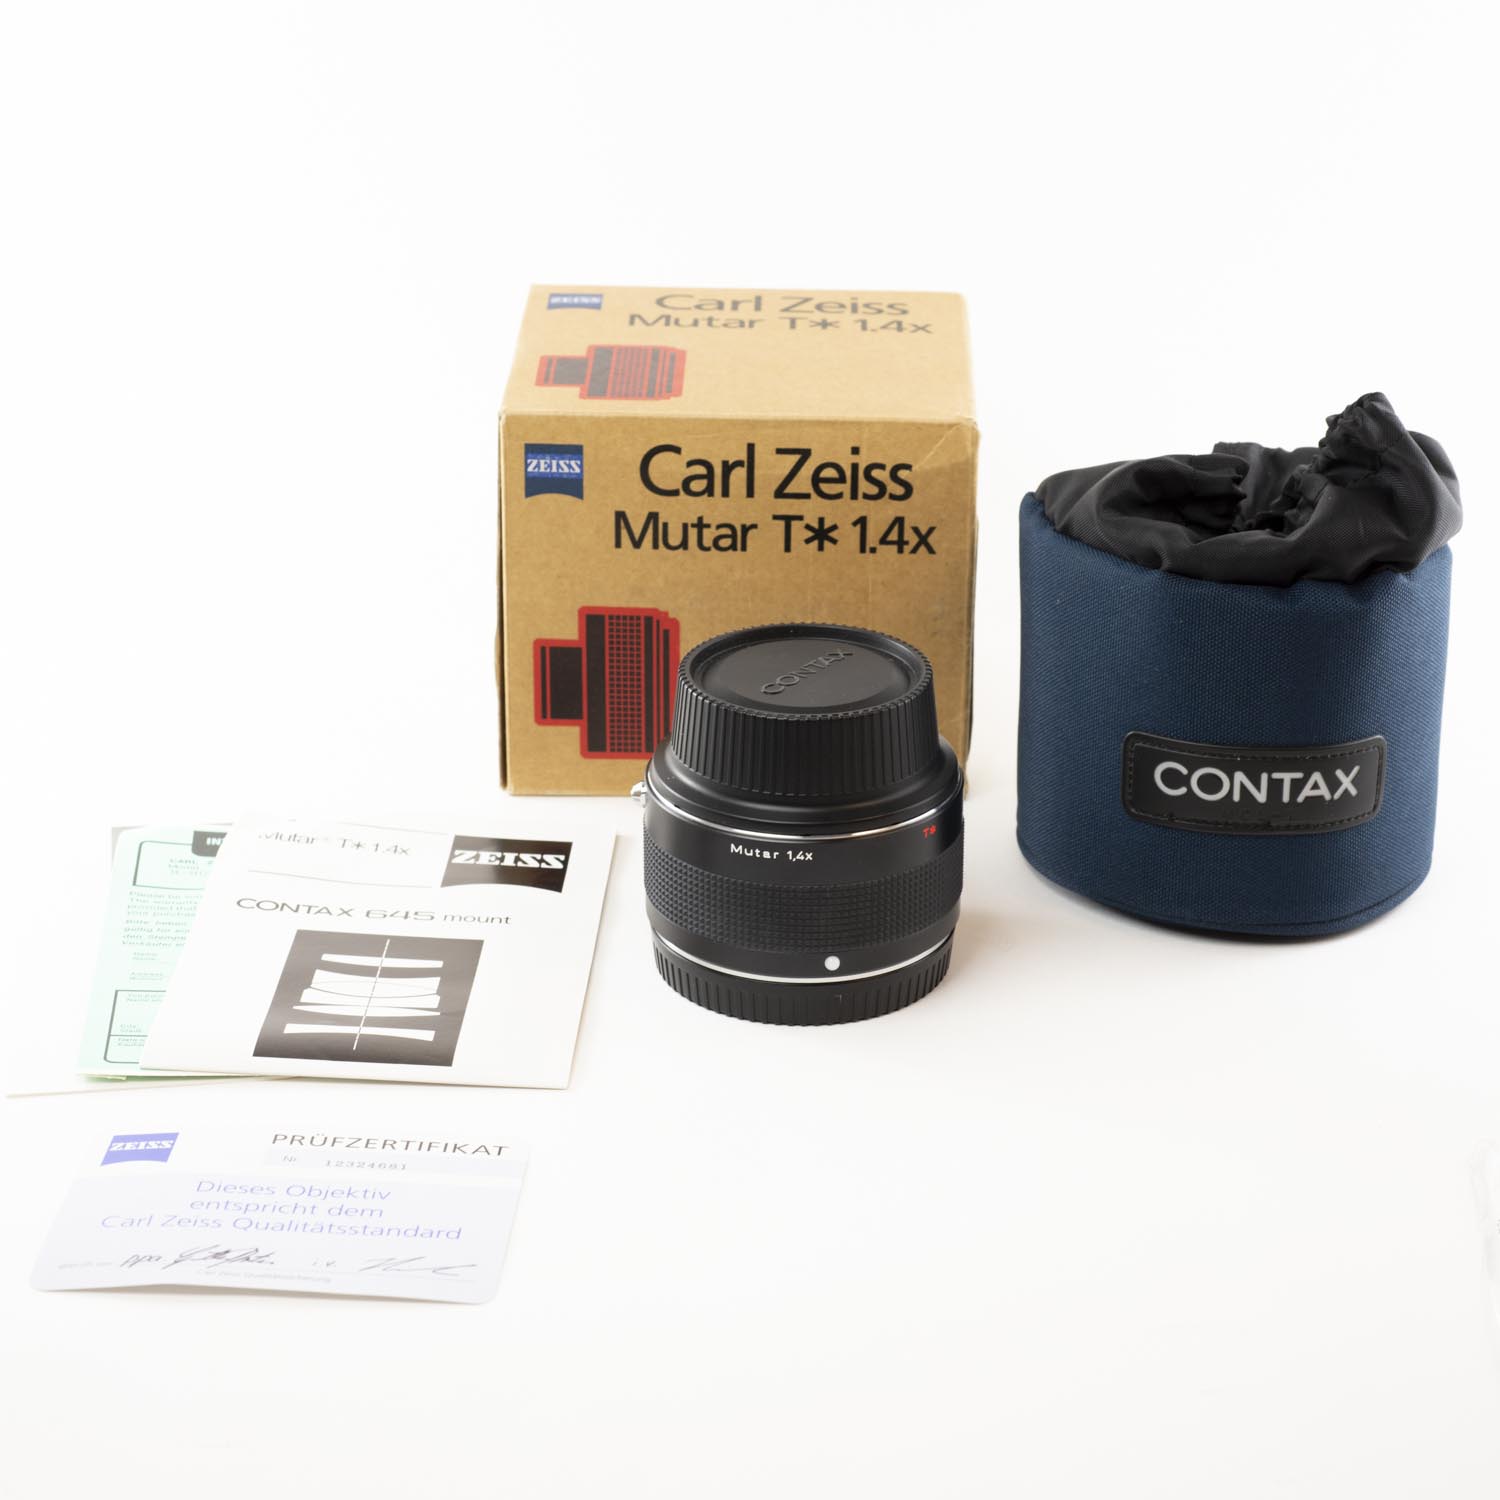 TThumbnail image for Carl Zeiss Mutar T* 1.4x for Contax 645